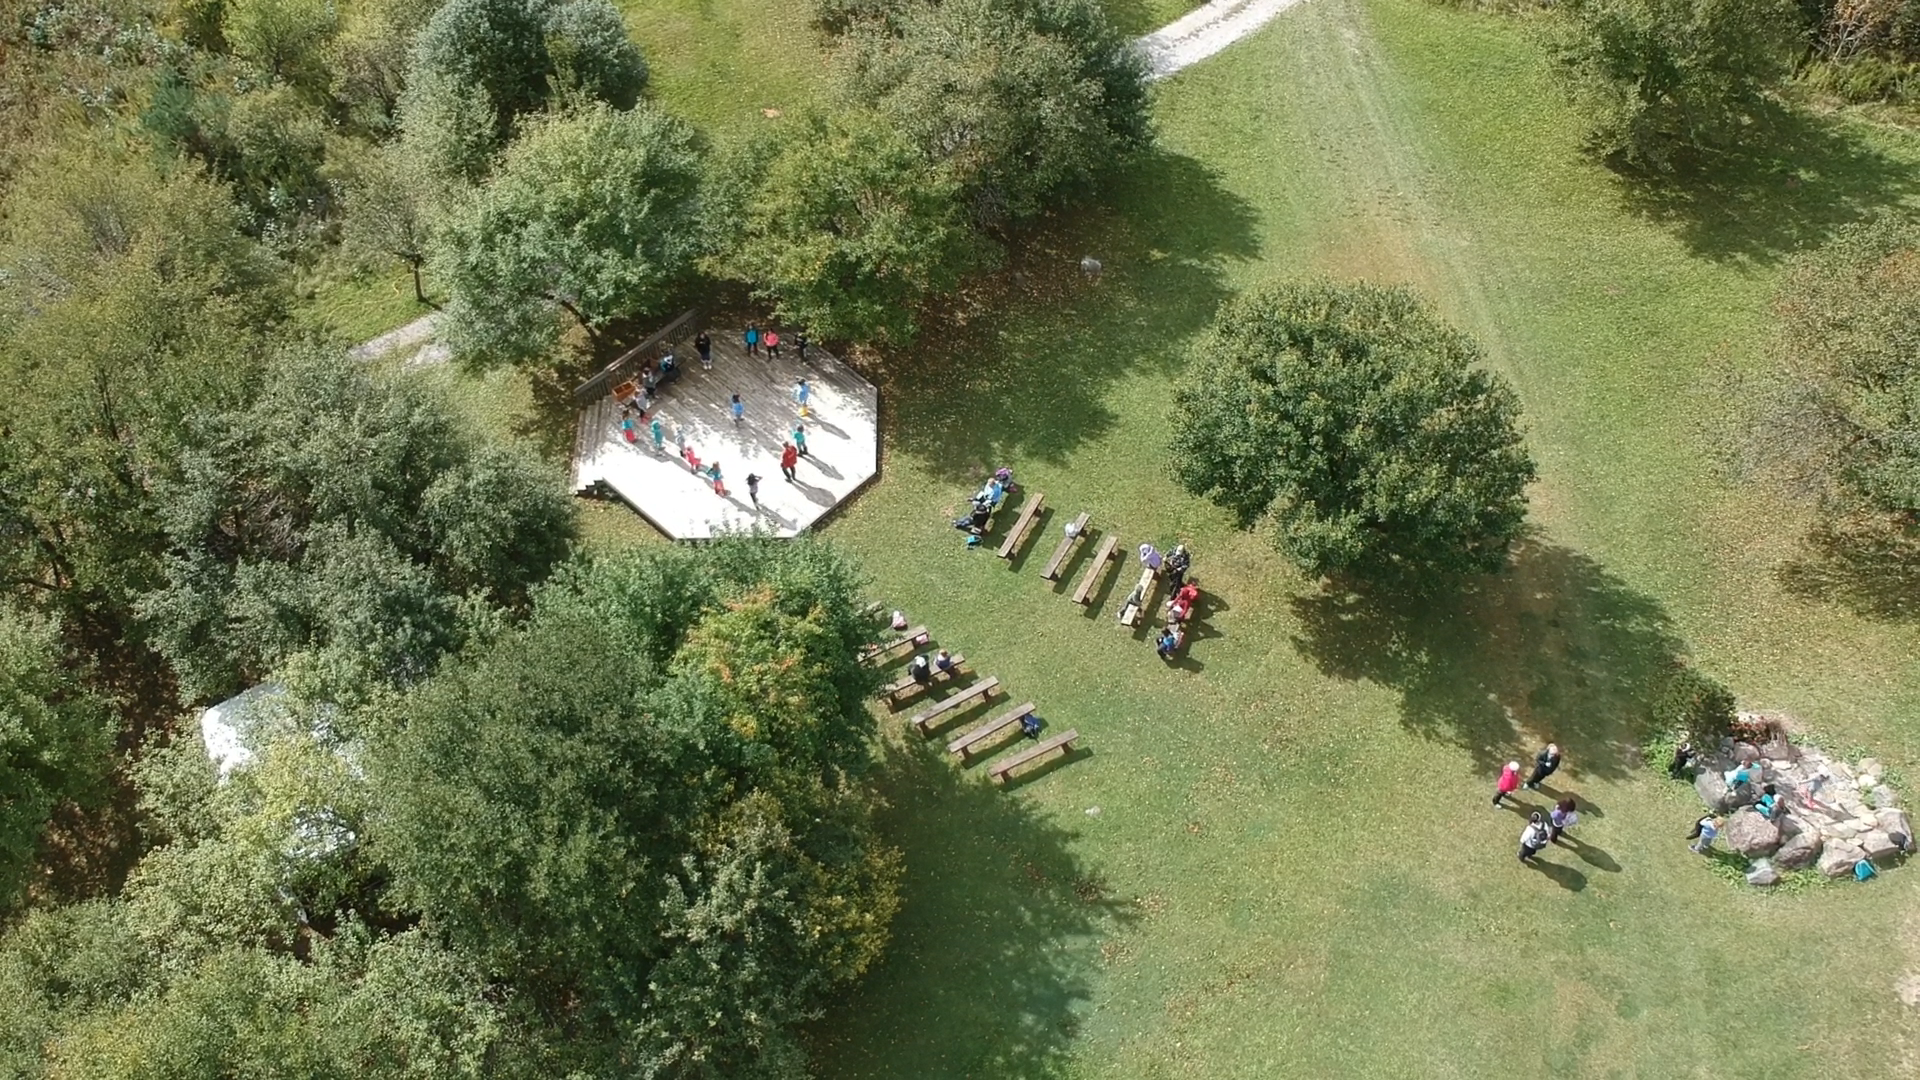 Group of campers on the stage circled together playing and learning in the apple orchard